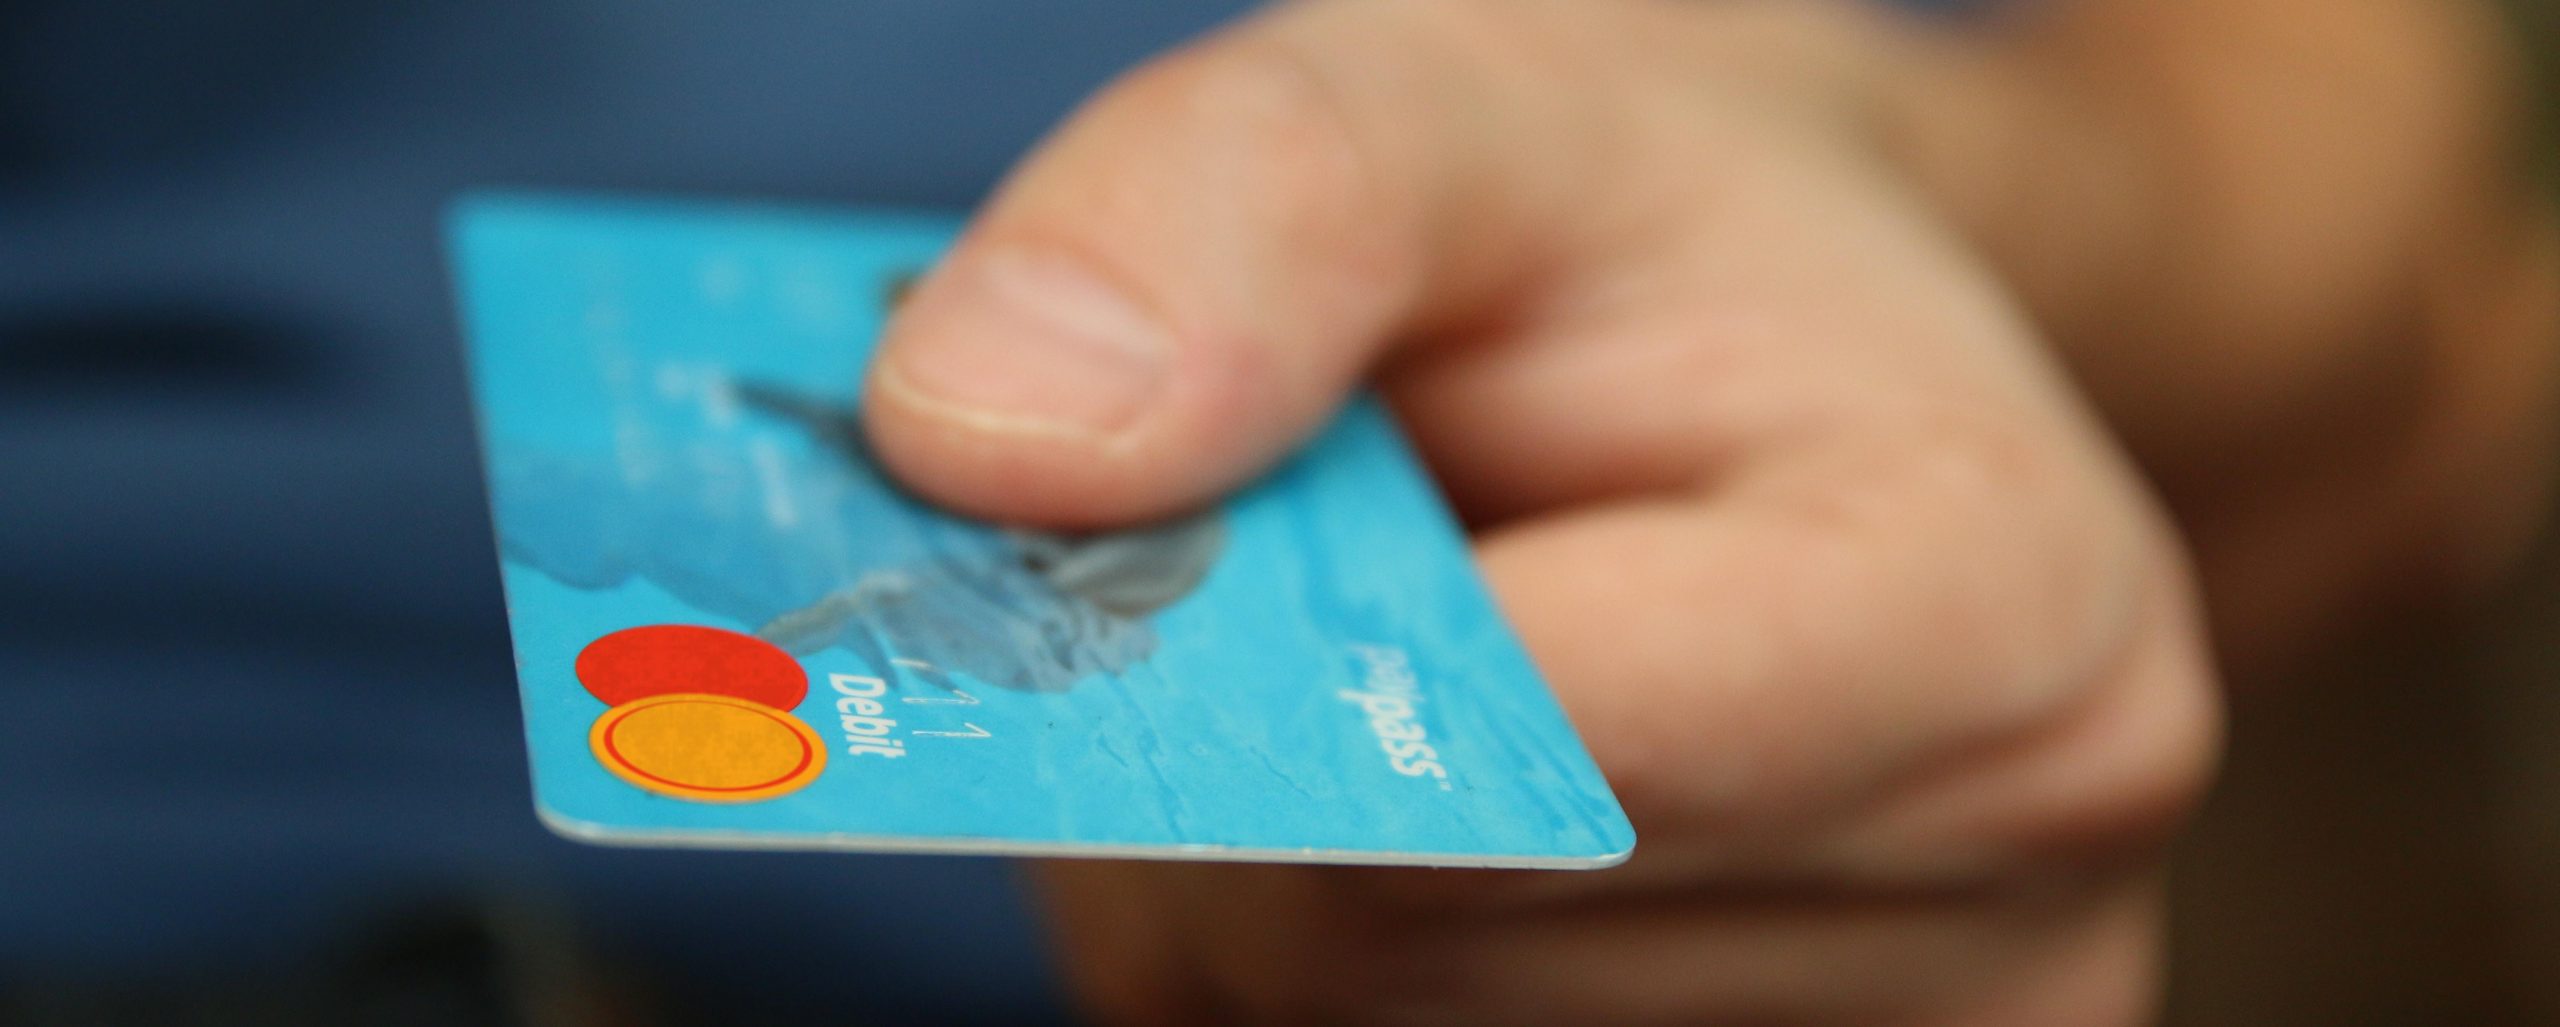 Photo of a debit card - From Pexels website